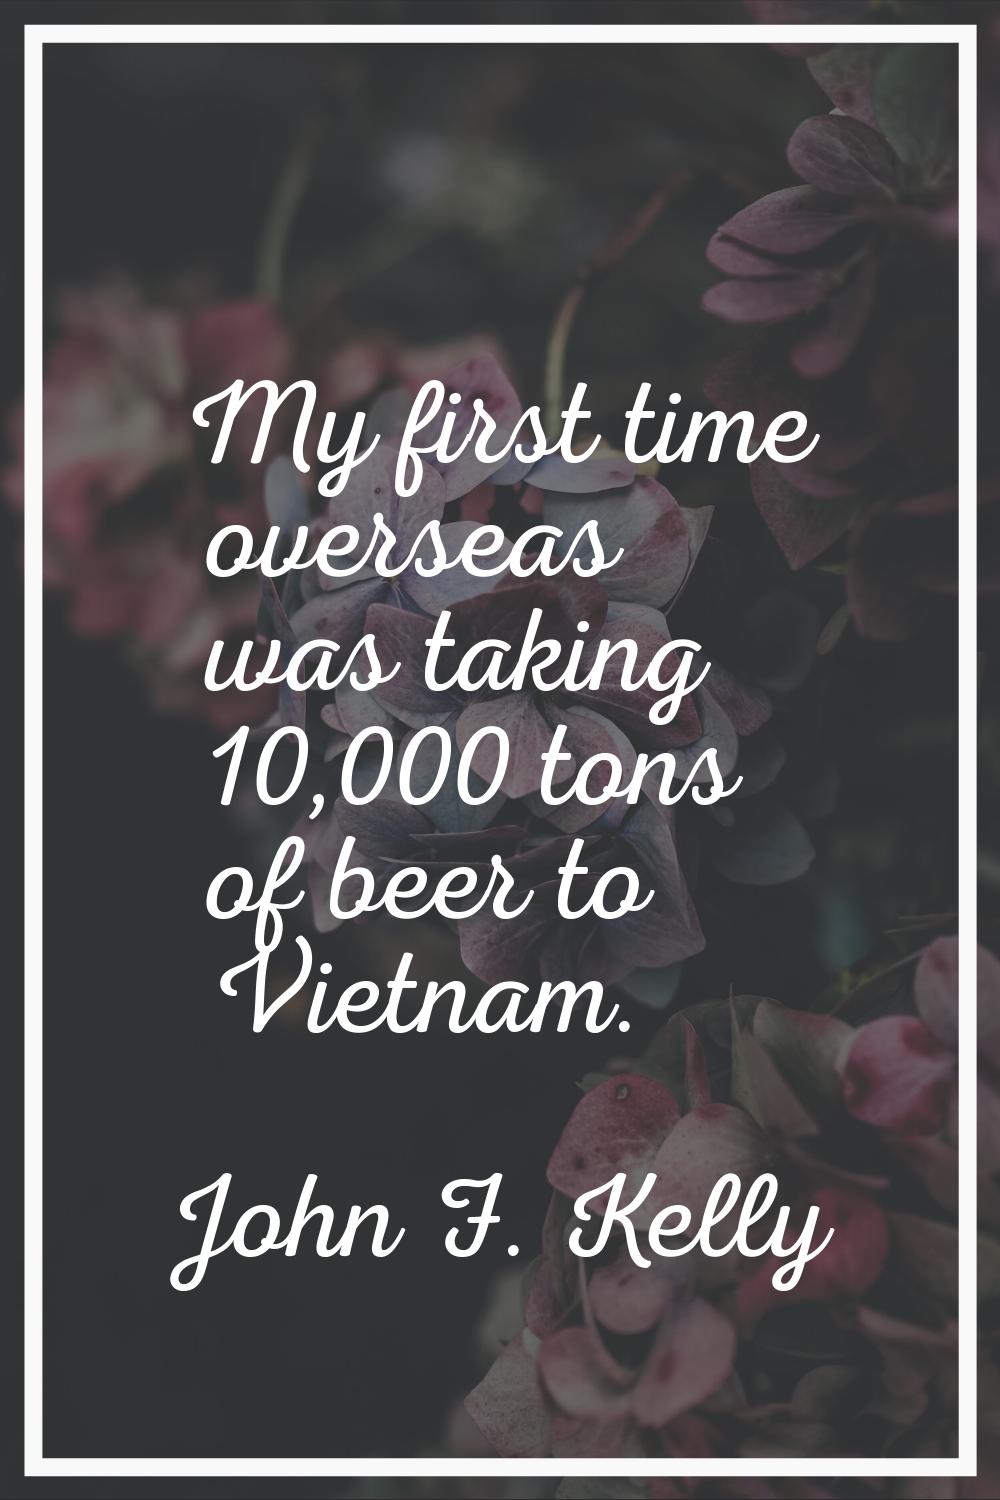 My first time overseas was taking 10,000 tons of beer to Vietnam.